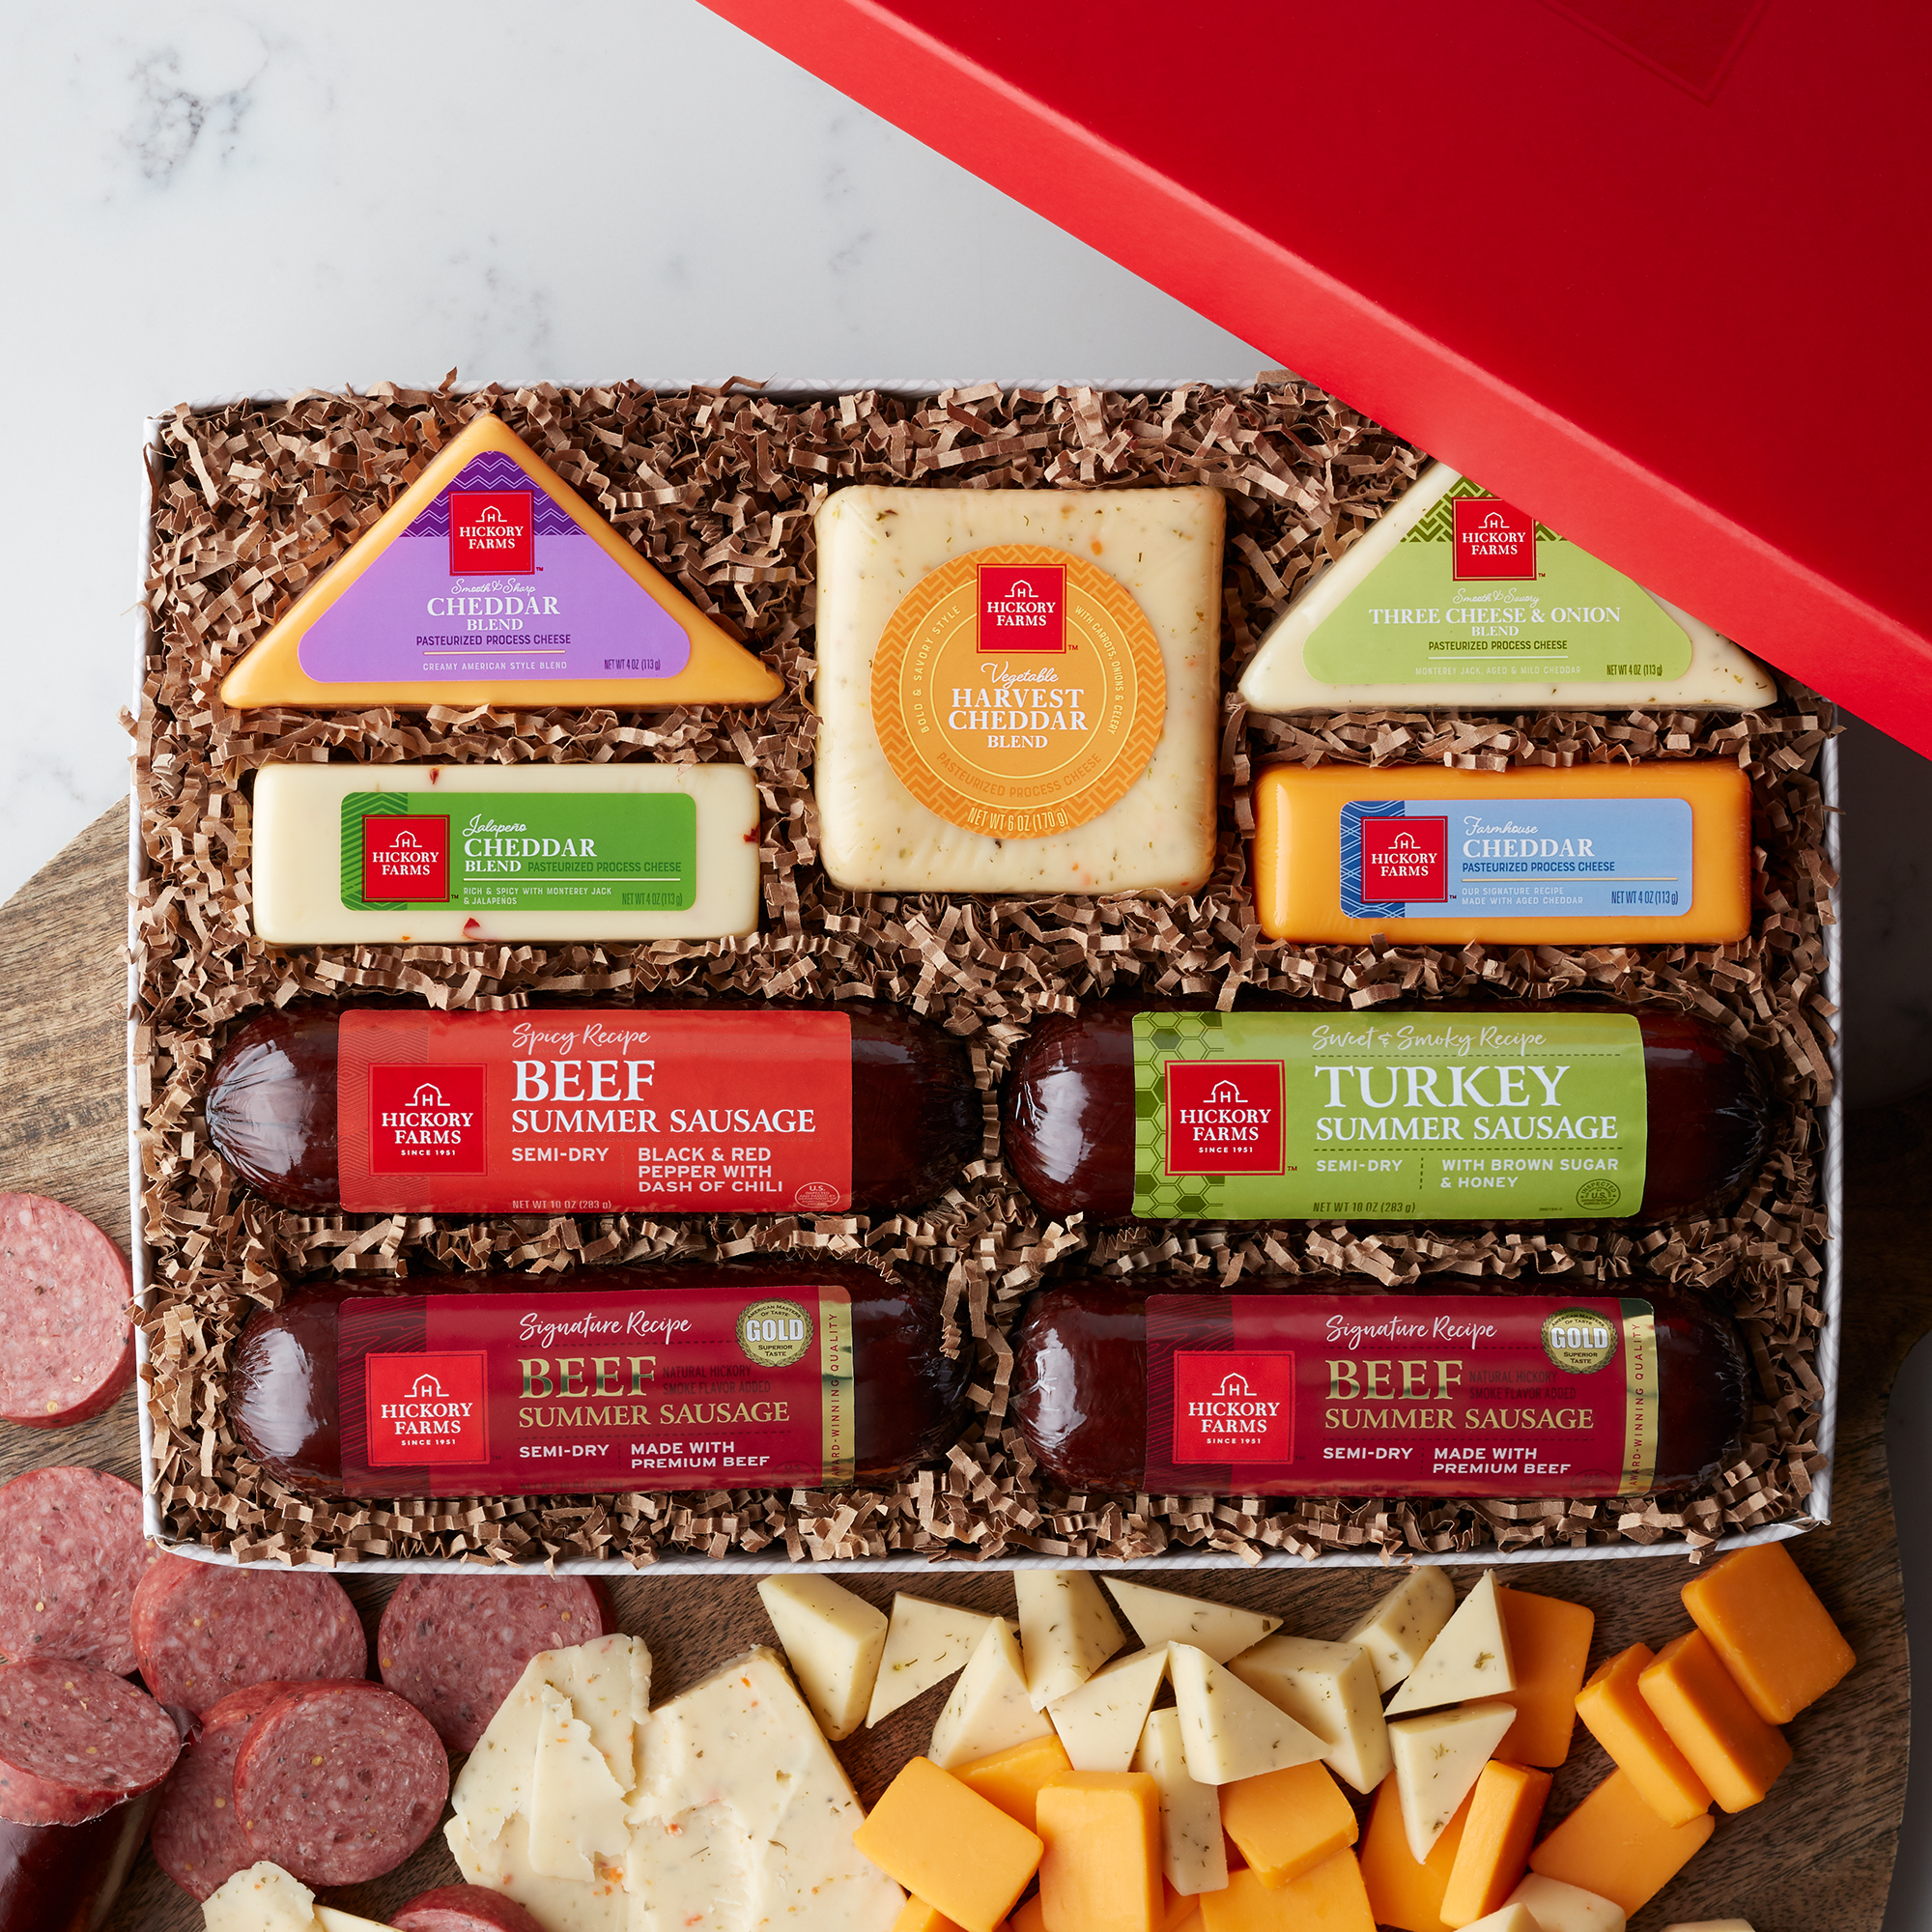 Premium Meat & Cheese Gift Box with Sausage | Christmas & Holiday Food Gift | Hickory Farms